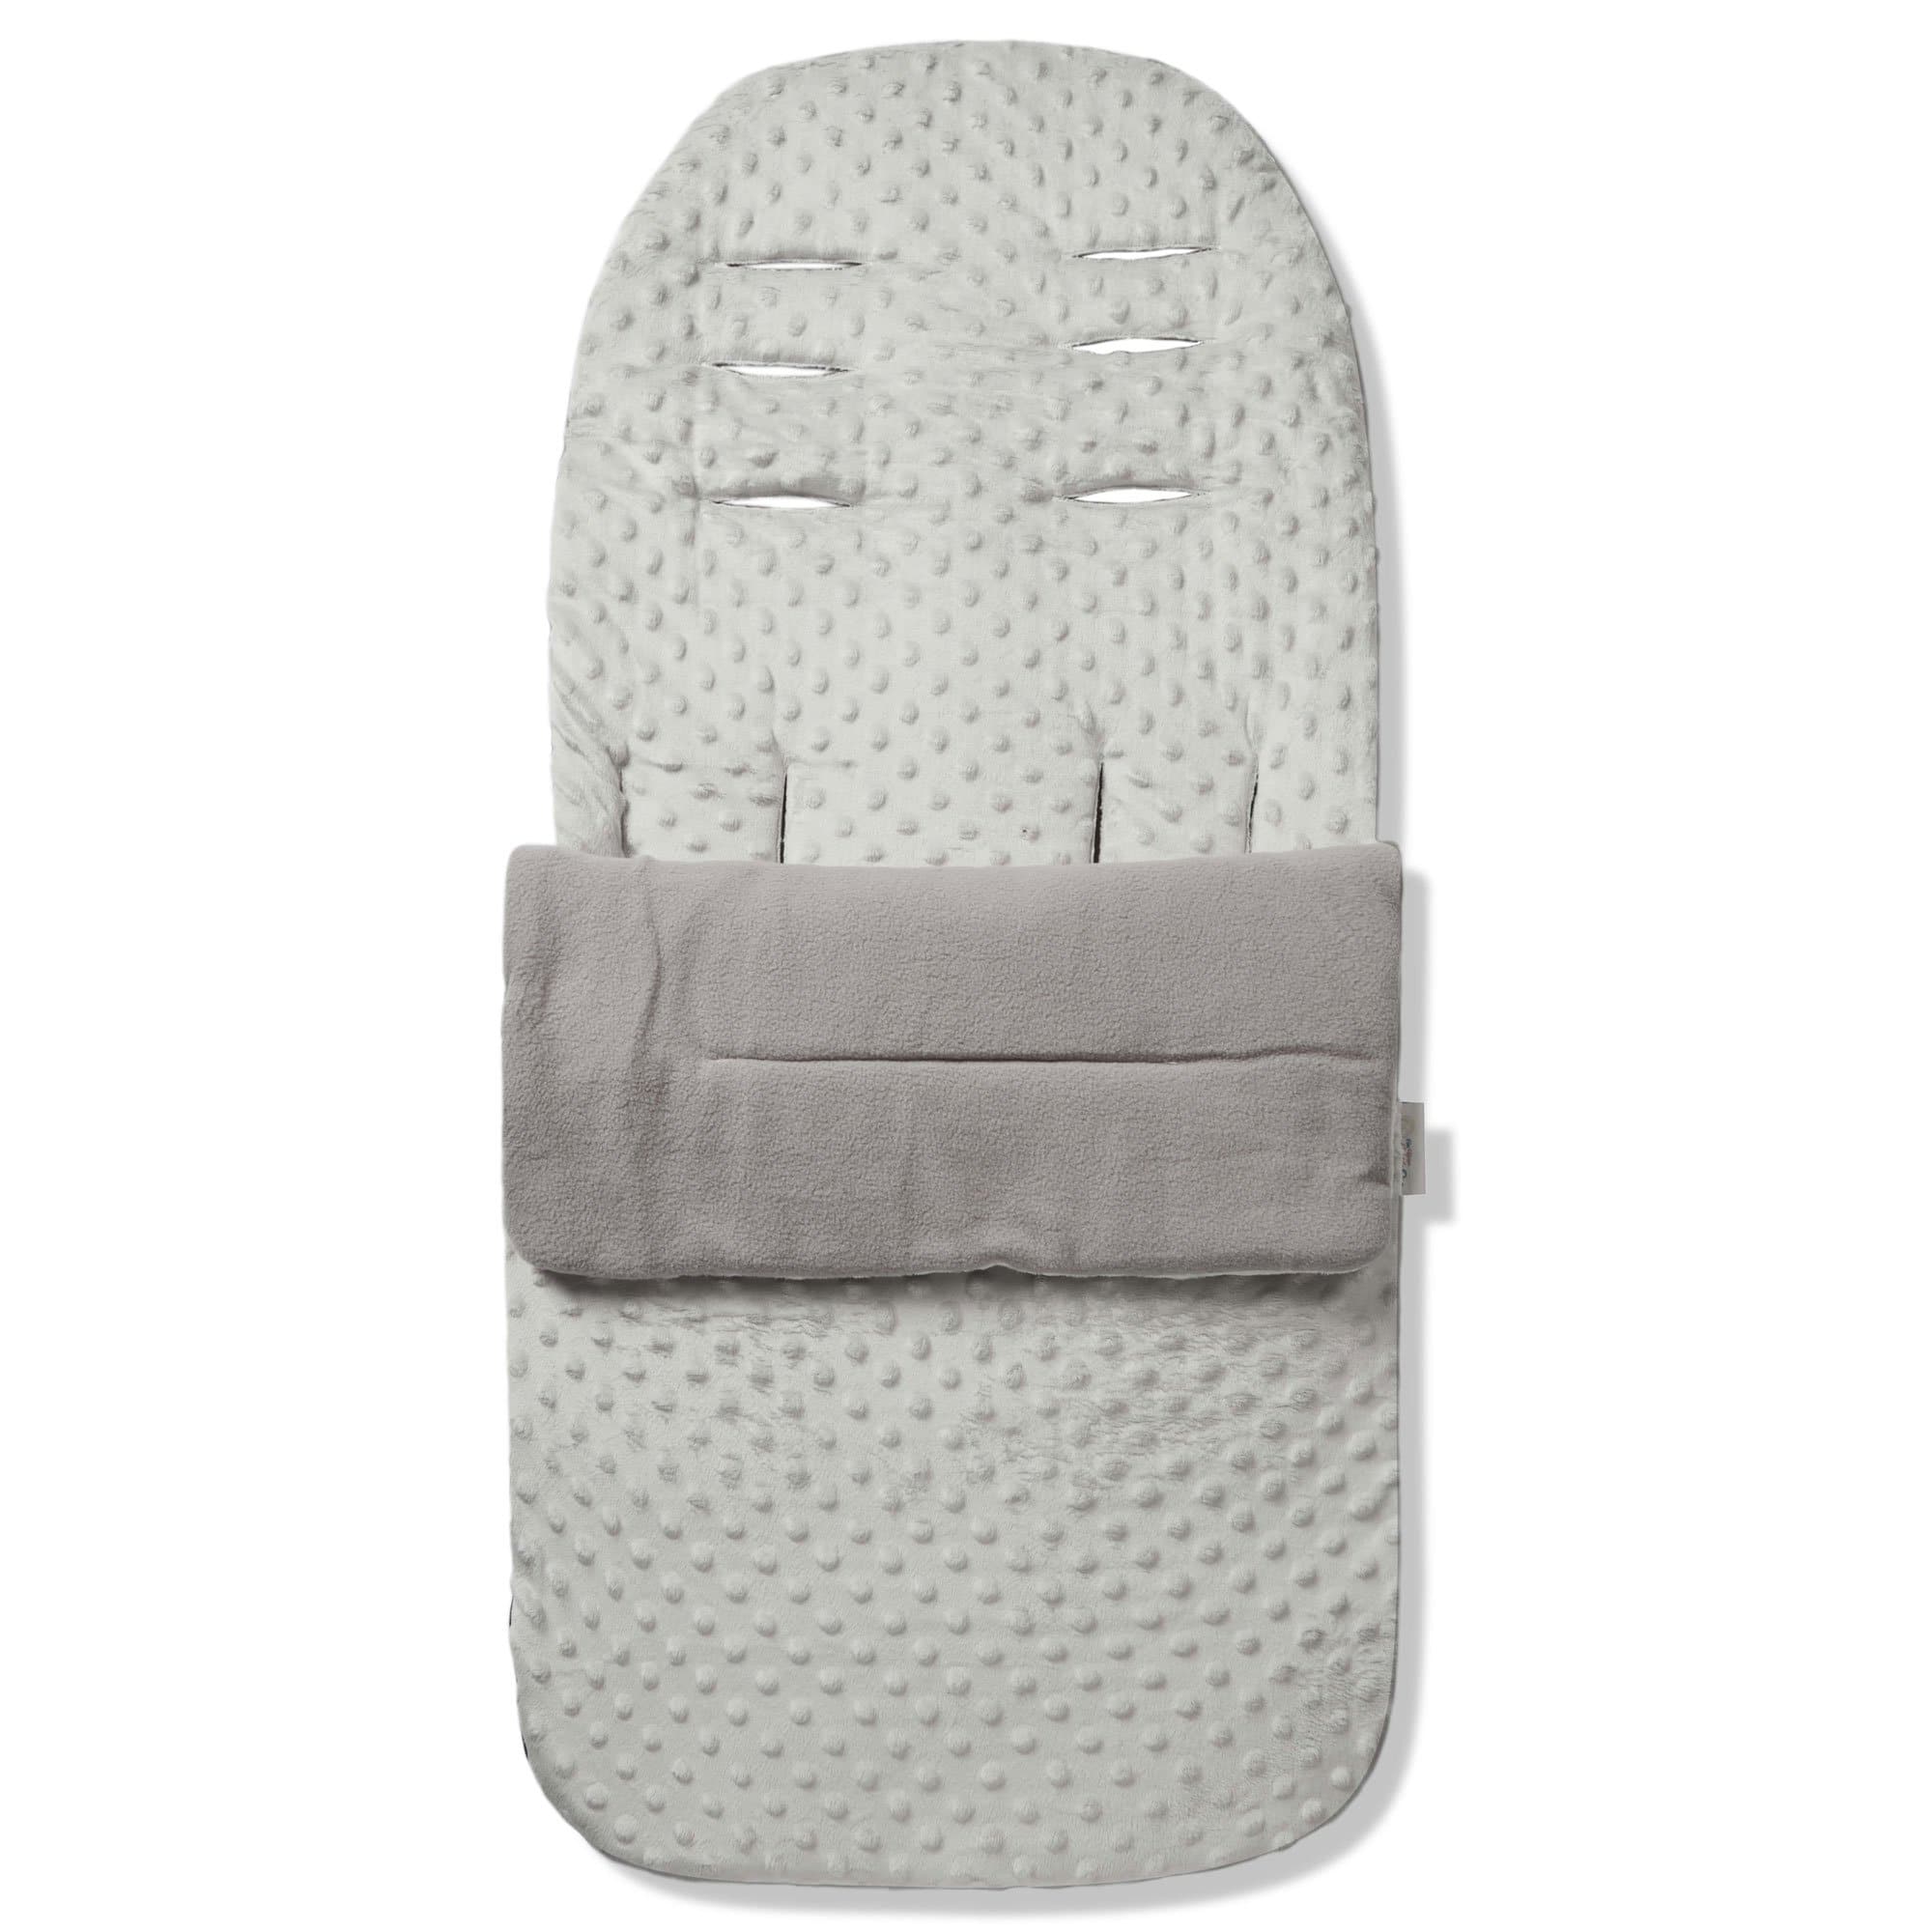 Dimple Footmuff / Cosy Toes Compatible with Britax - Grey / Fits All Models | For Your Little One